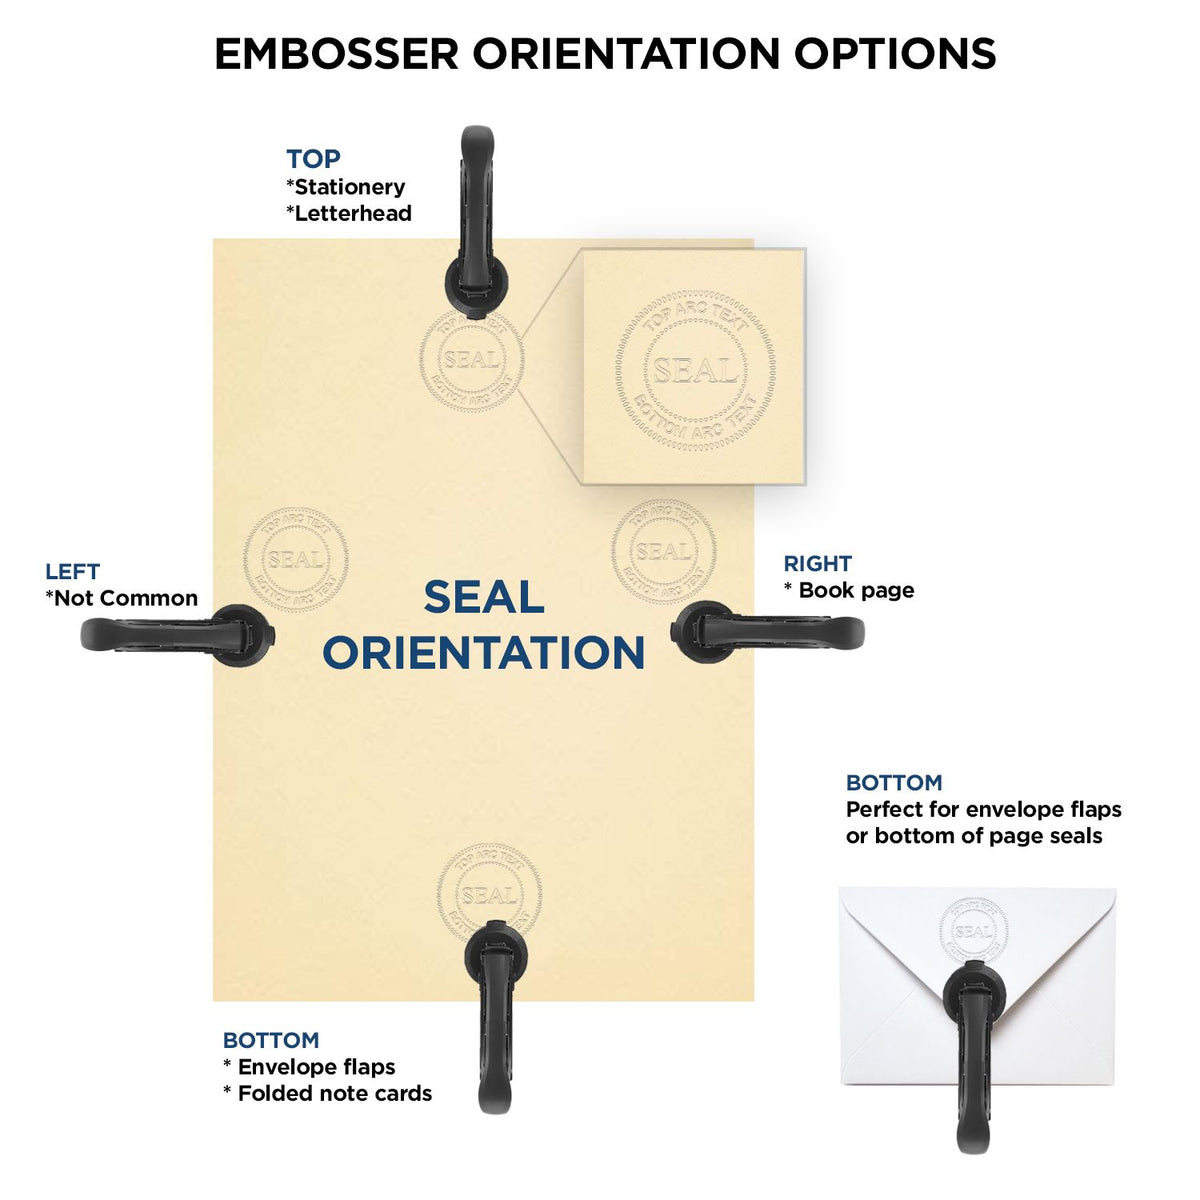 An infographic for the Handheld Wyoming Professional Engineer Embosser showing embosser orientation, this is showing examples of a top, bottom, right and left insert.